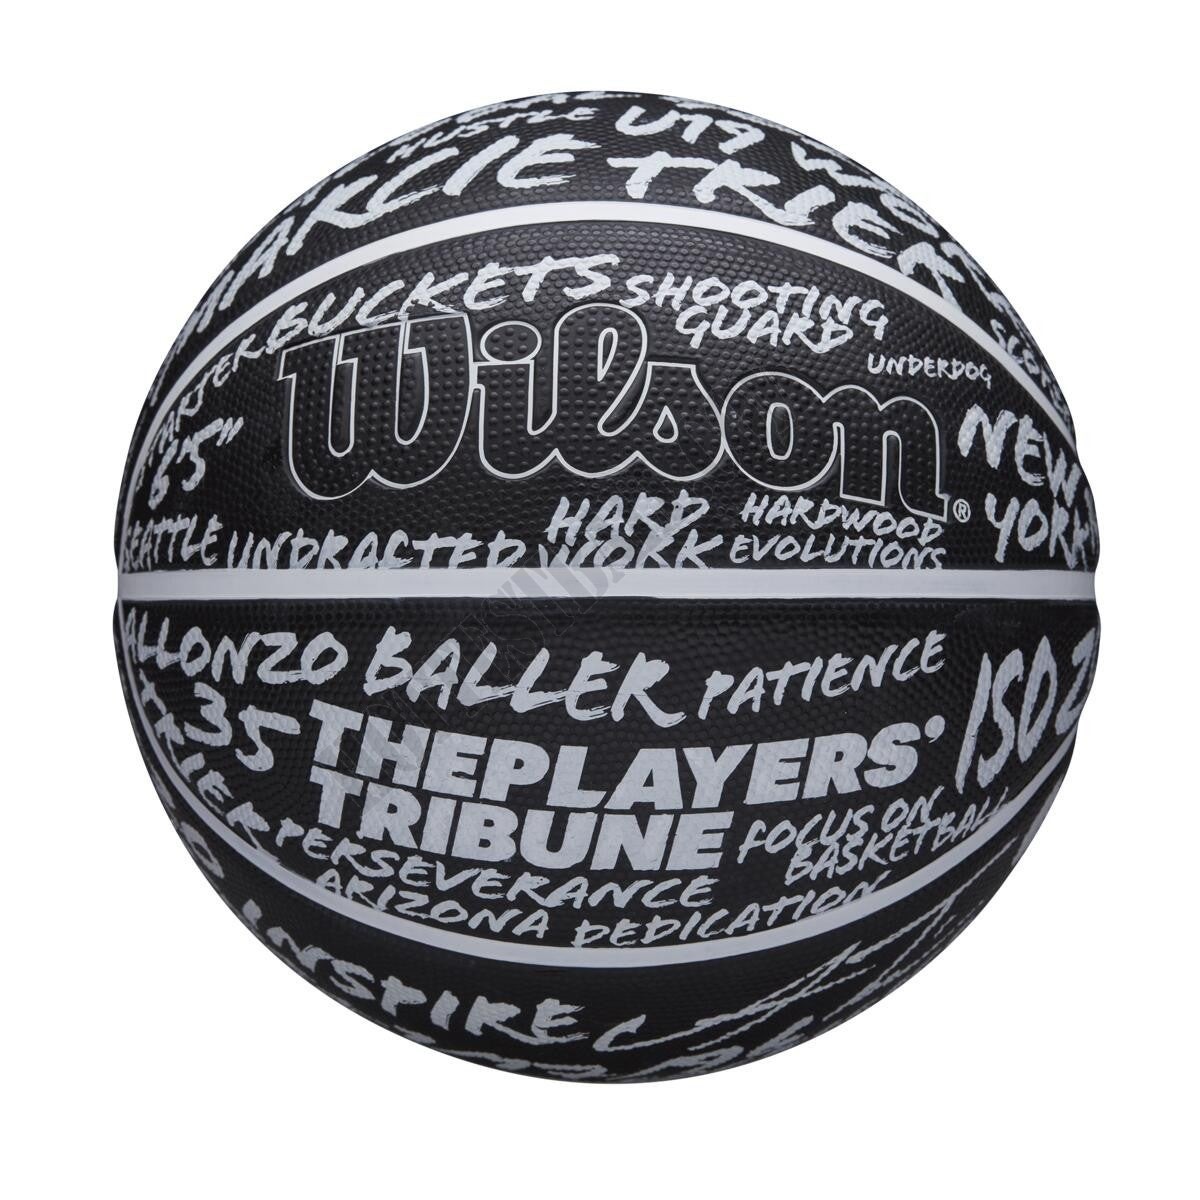 ISO Zo x The Players' Tribune Limited Edition Basketball - Wilson Discount Store - ISO Zo x The Players' Tribune Limited Edition Basketball - Wilson Discount Store